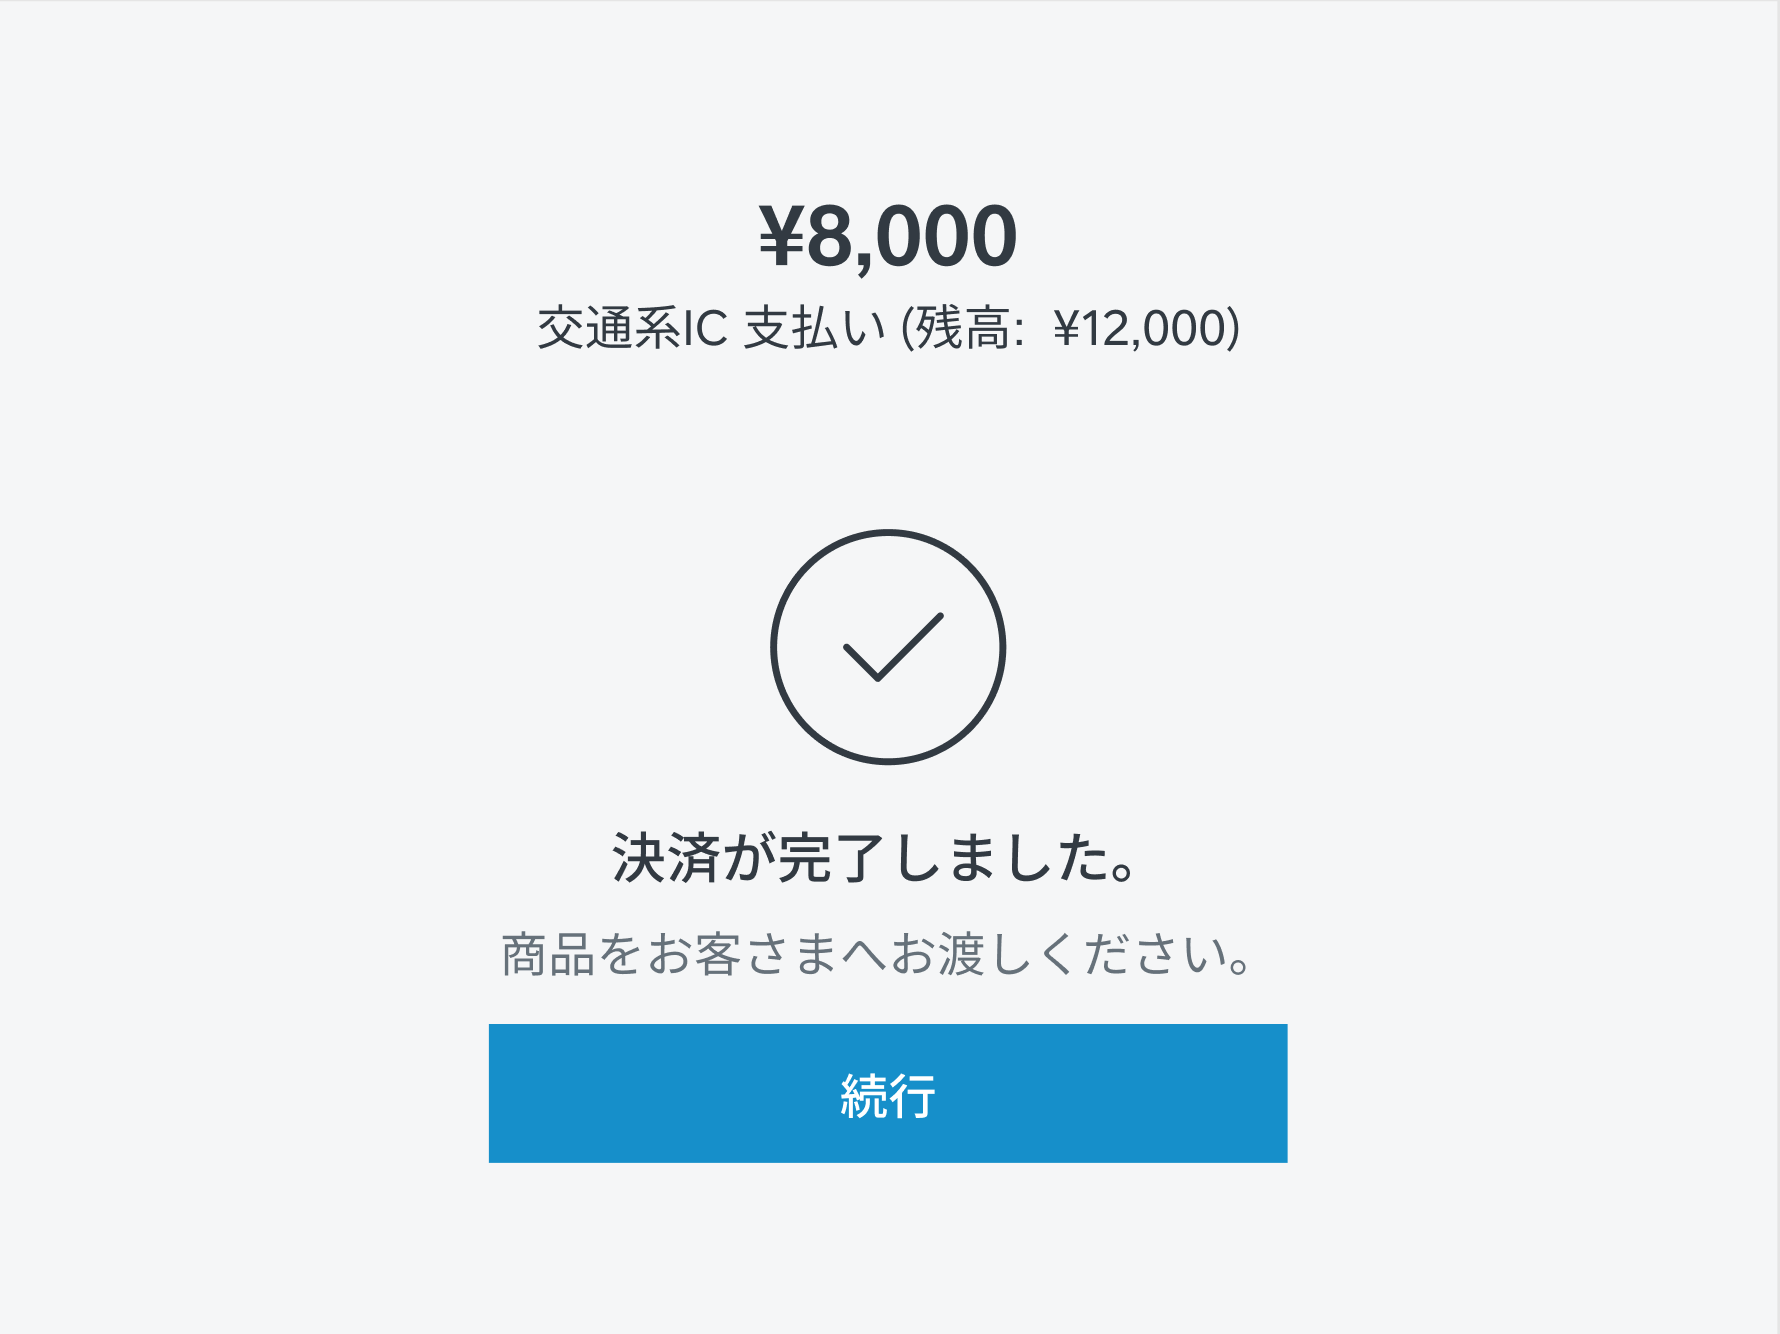 Emoney Miryo payment completed